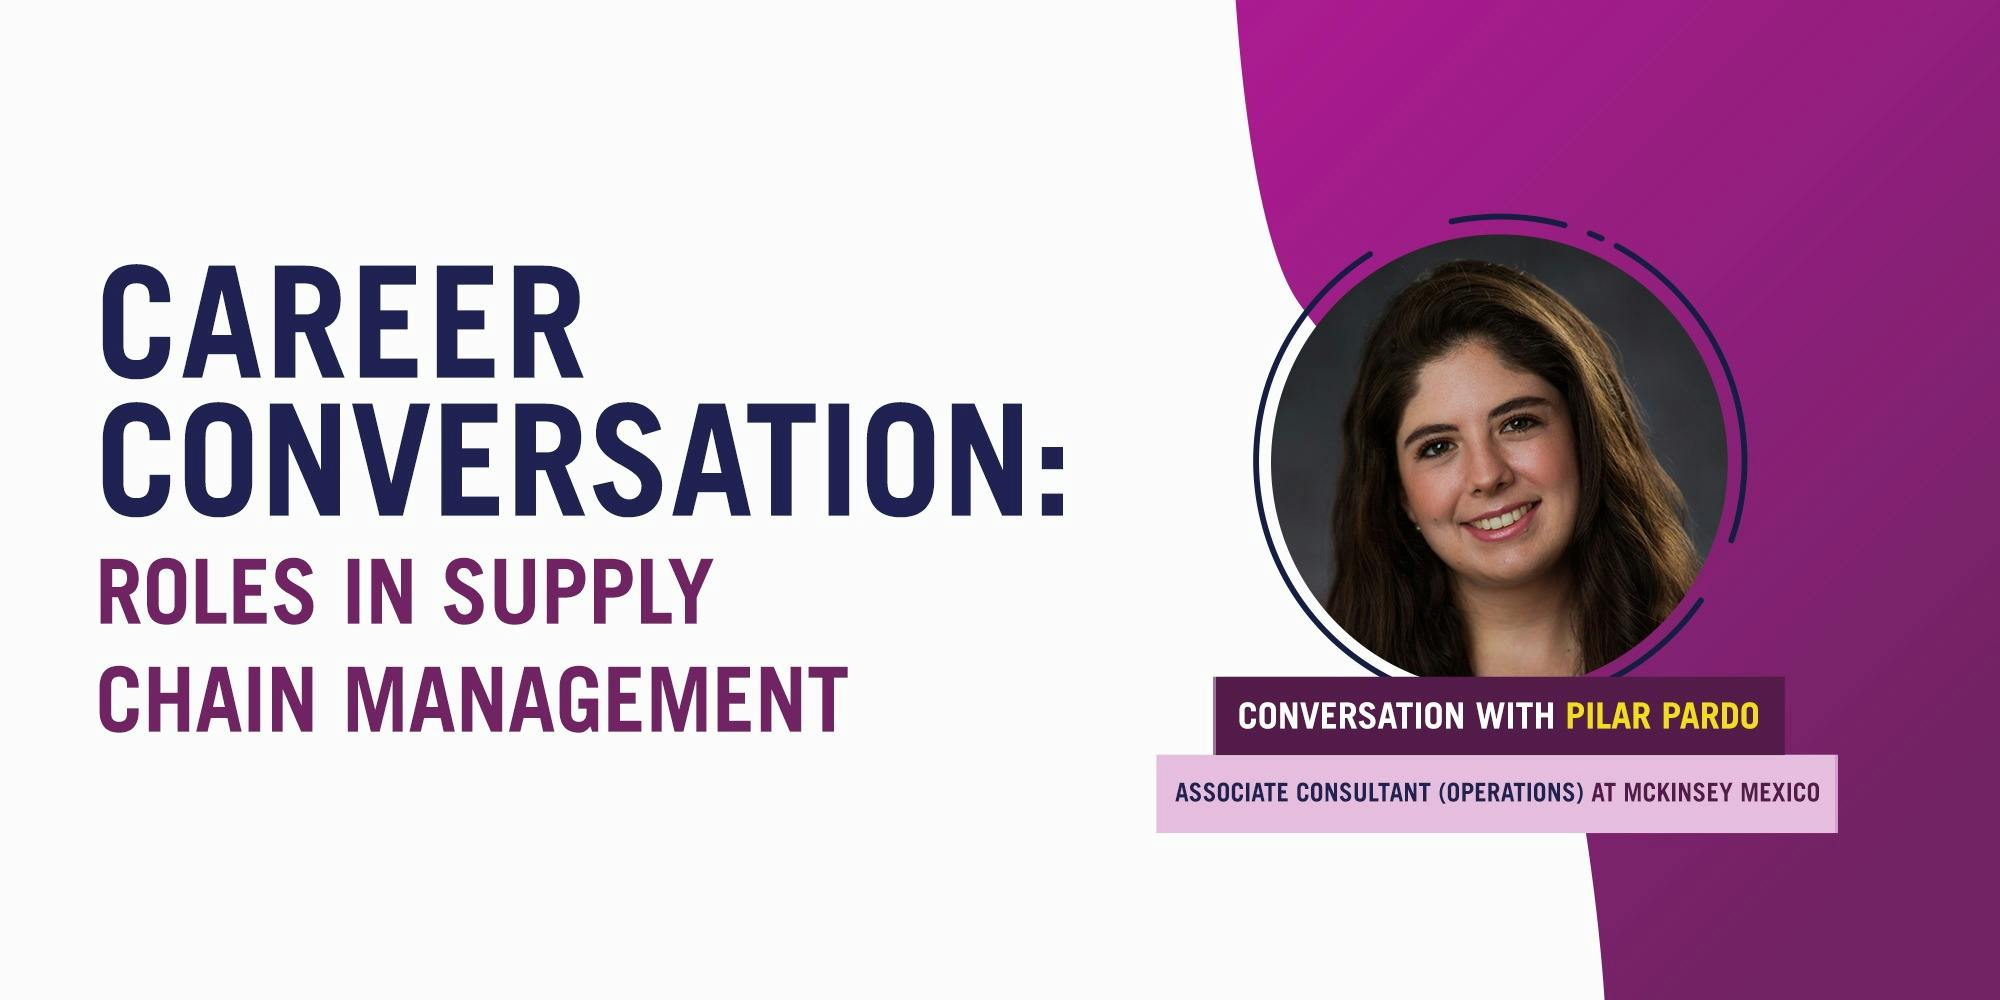 Career Conversation: Roles in Supply Chain Management